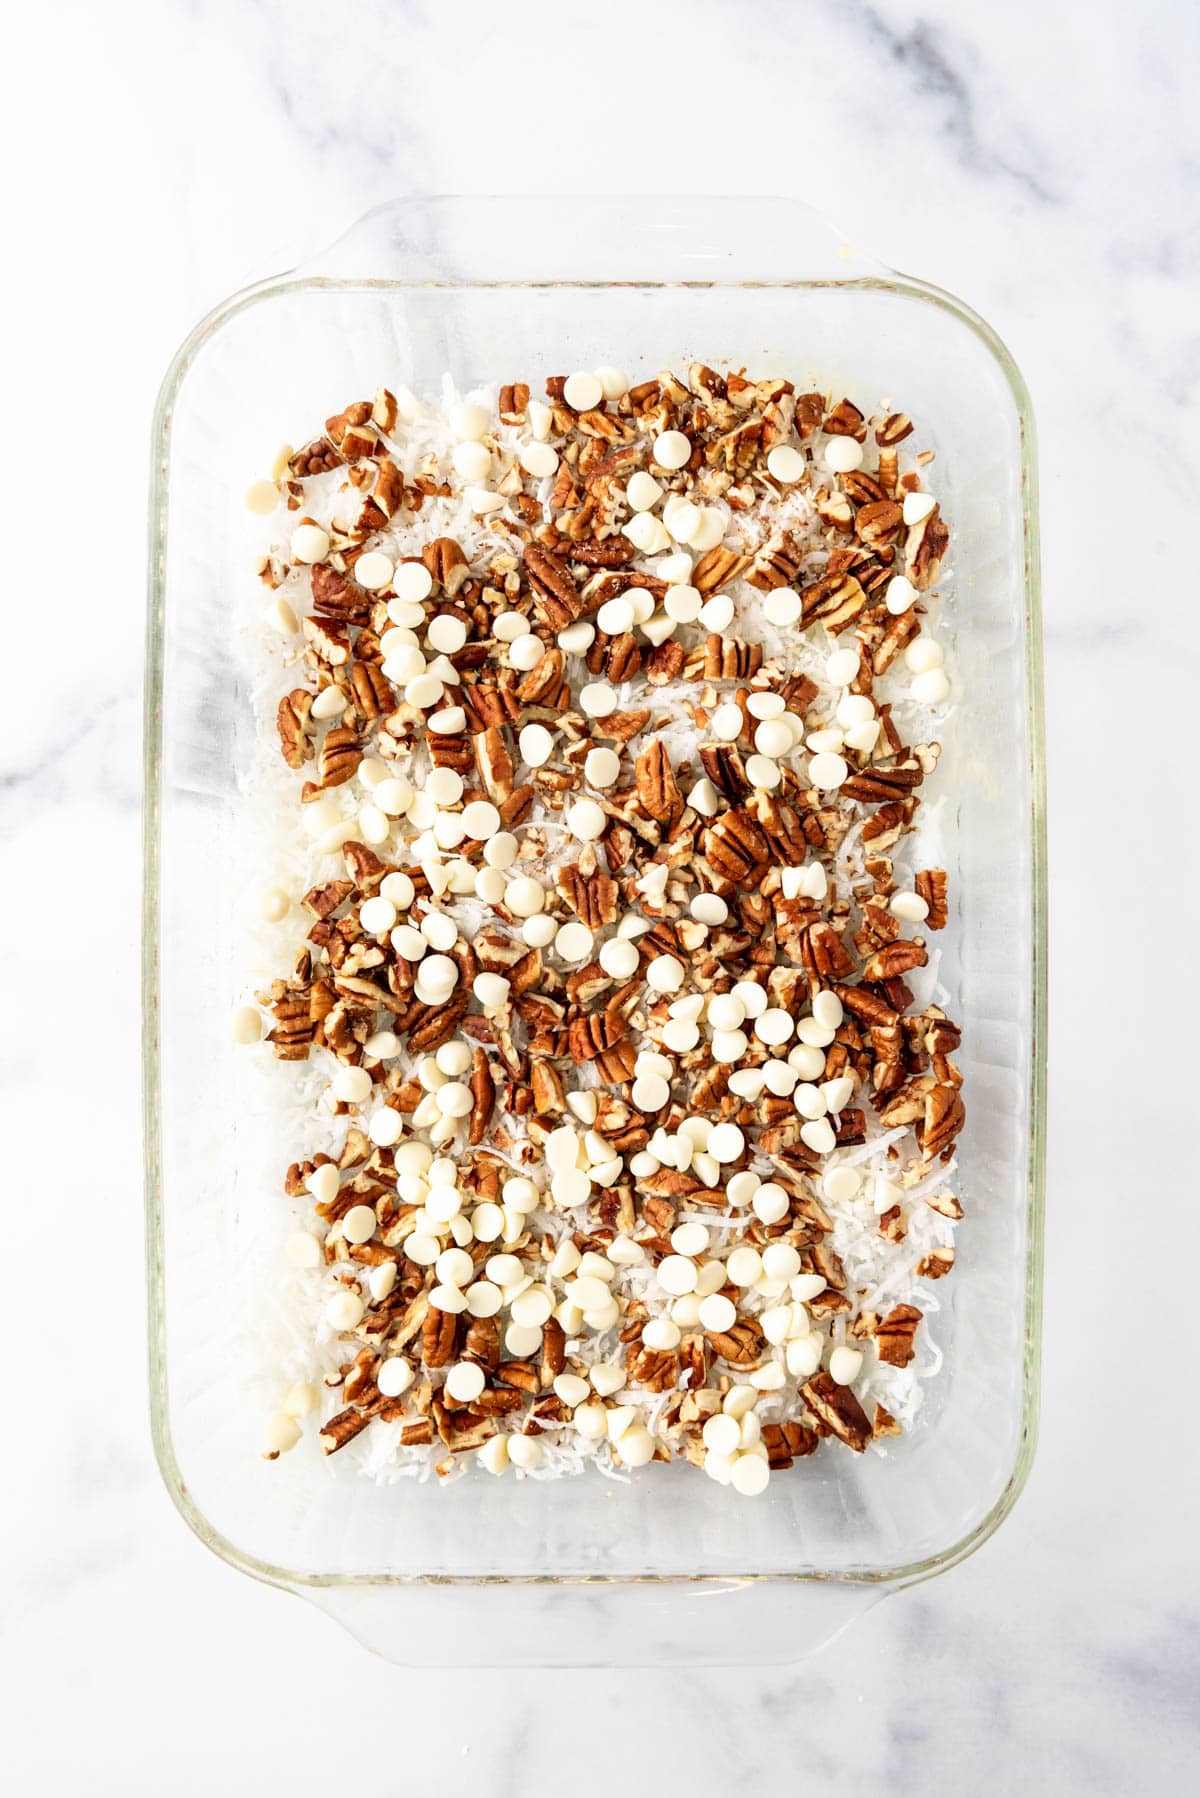 Coconut pecans, and white chocolate chips in a glass baking dish.